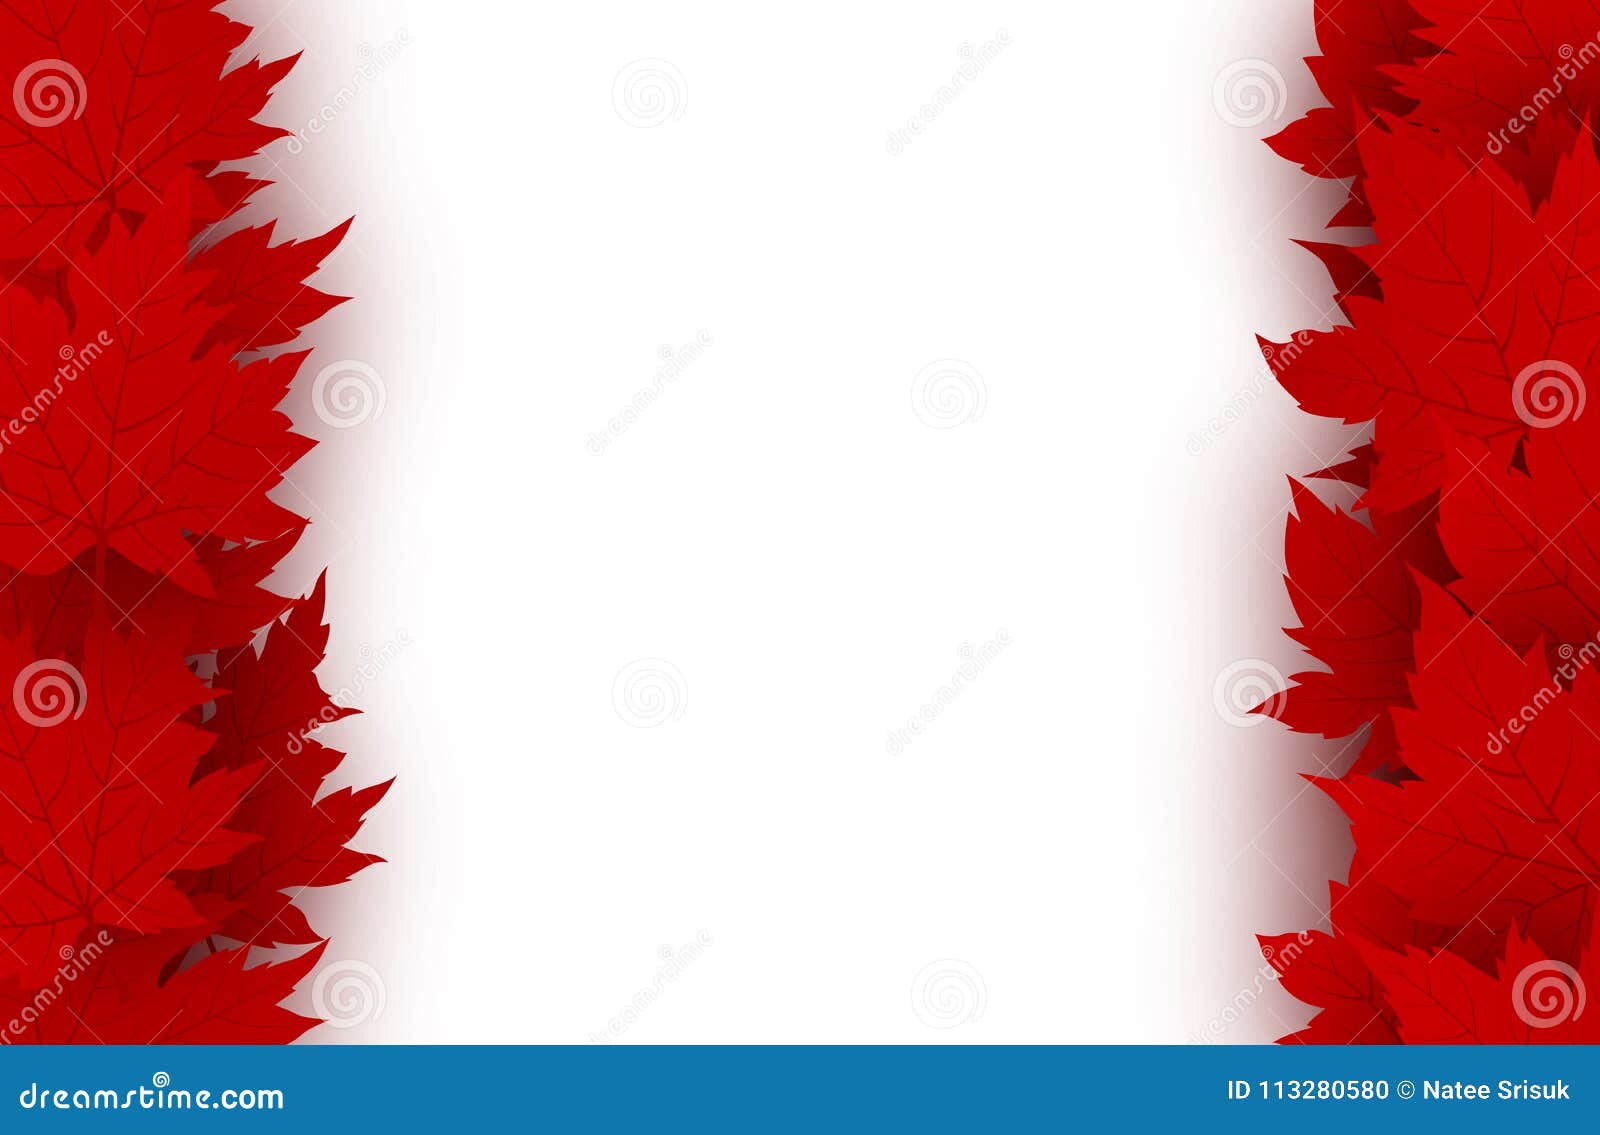 Canada Day Background Design Of Red Maple Leaves Isolated On White ...